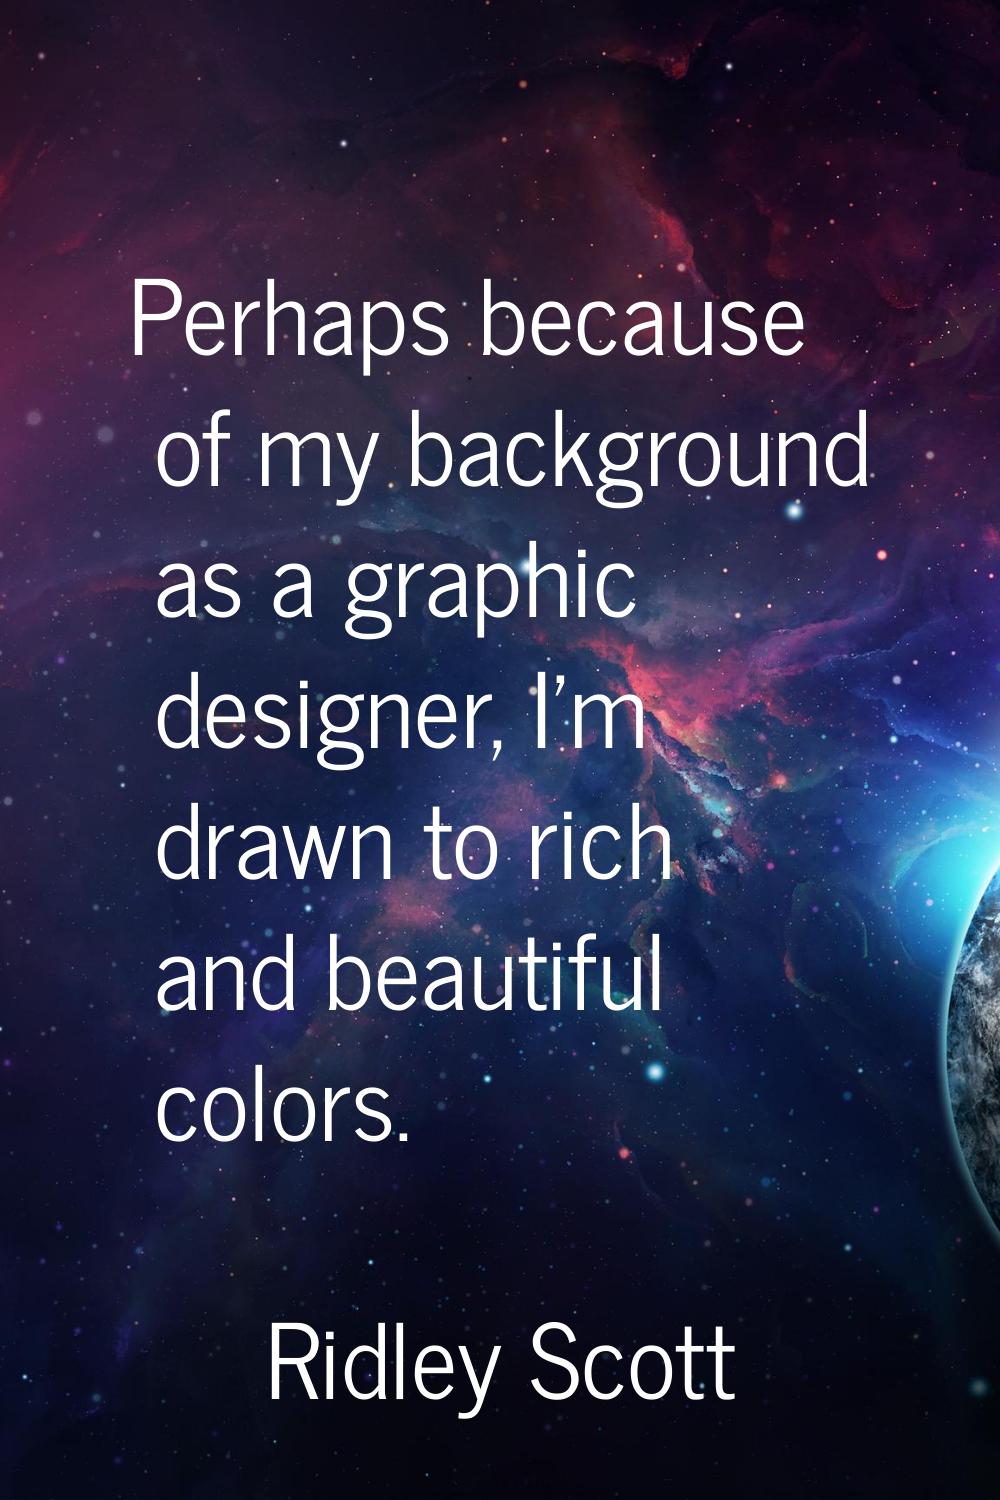 Perhaps because of my background as a graphic designer, I'm drawn to rich and beautiful colors.